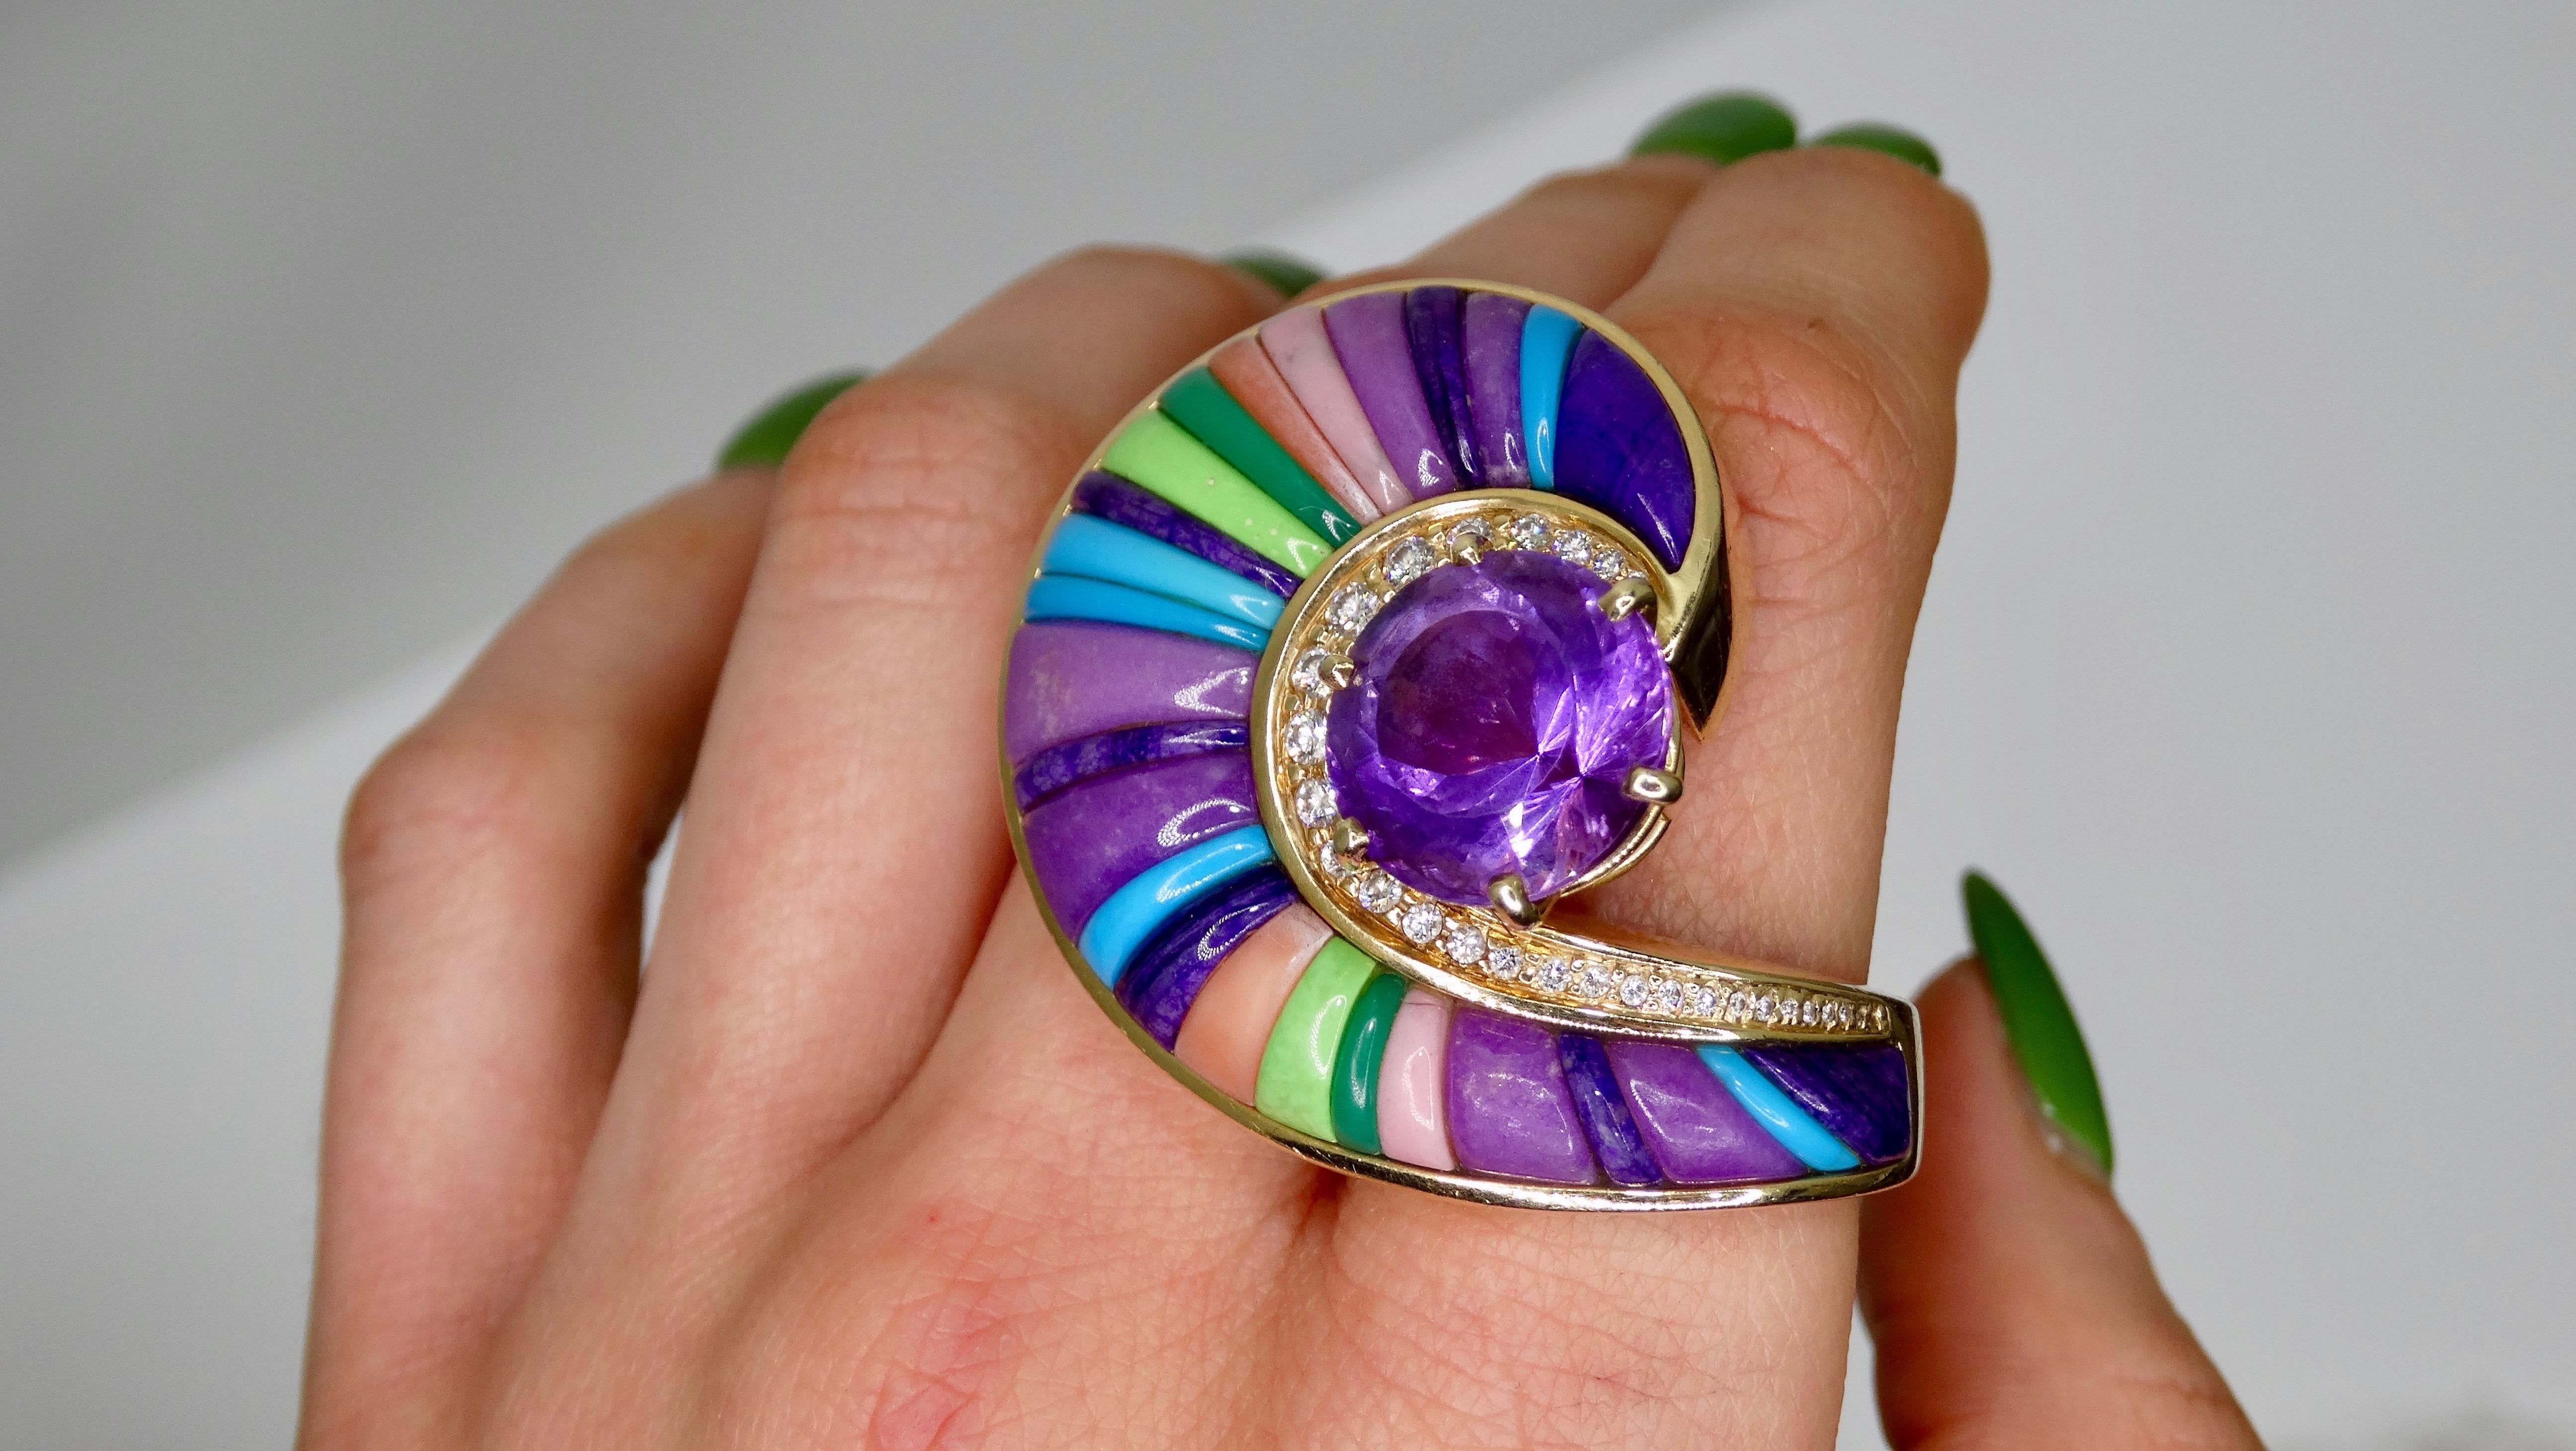 All eyes on you with this stunning custom made cocktail ring! Set in a large spiral 14k Gold band is a gorgeous round cut Amethyst ( 13mm round approx. 8.51 carat) in a prong setting with approximately 28 White Diamonds around it. Set in the